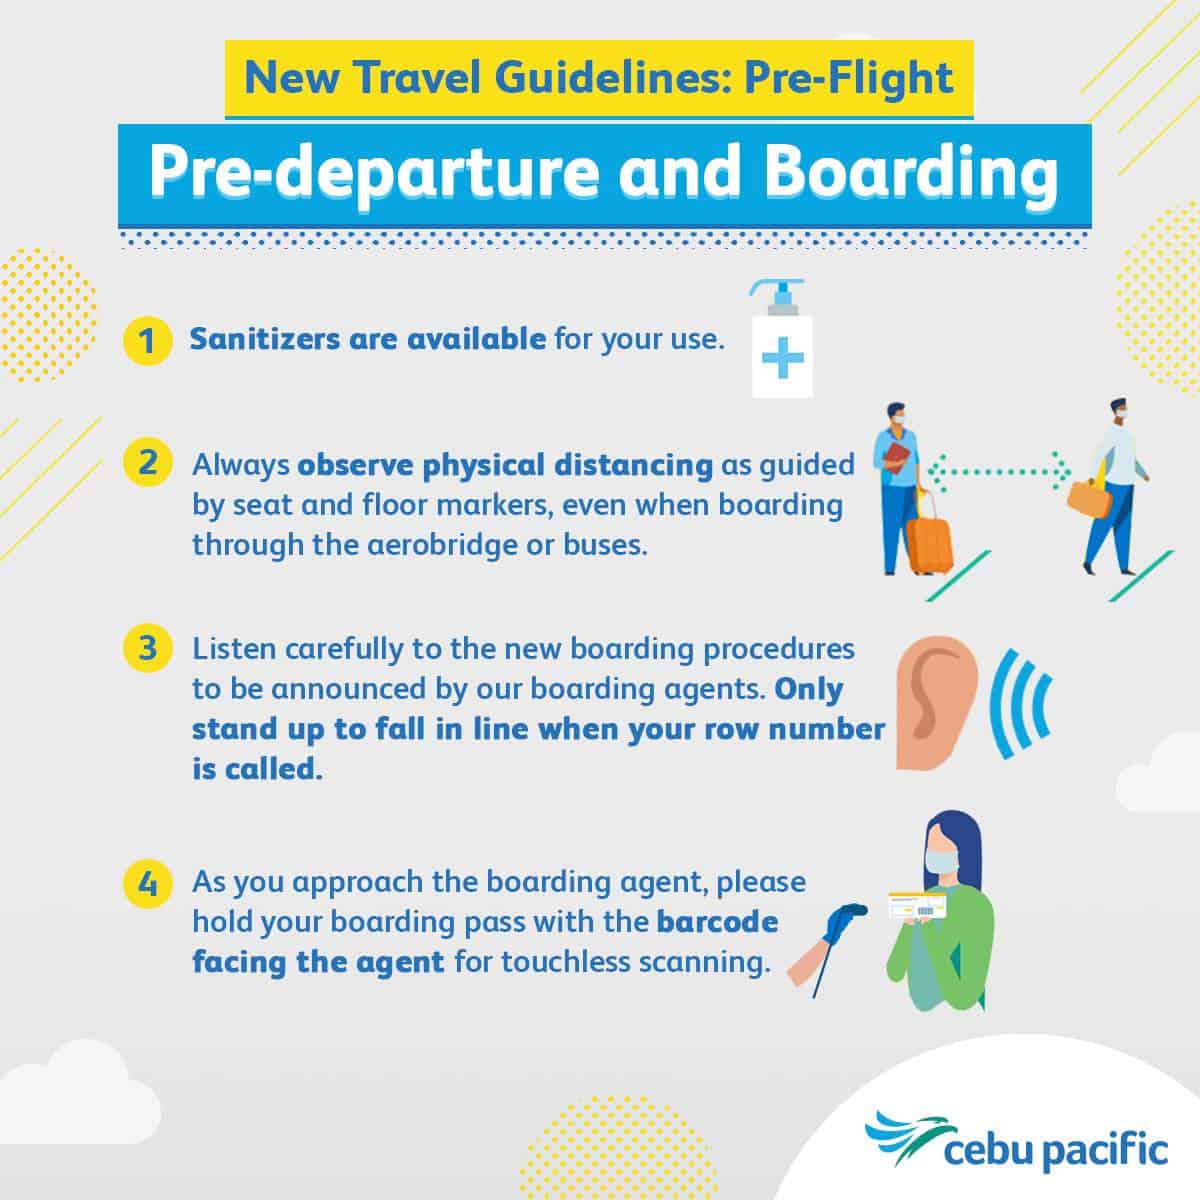 cebu pacific travel requirements for infant